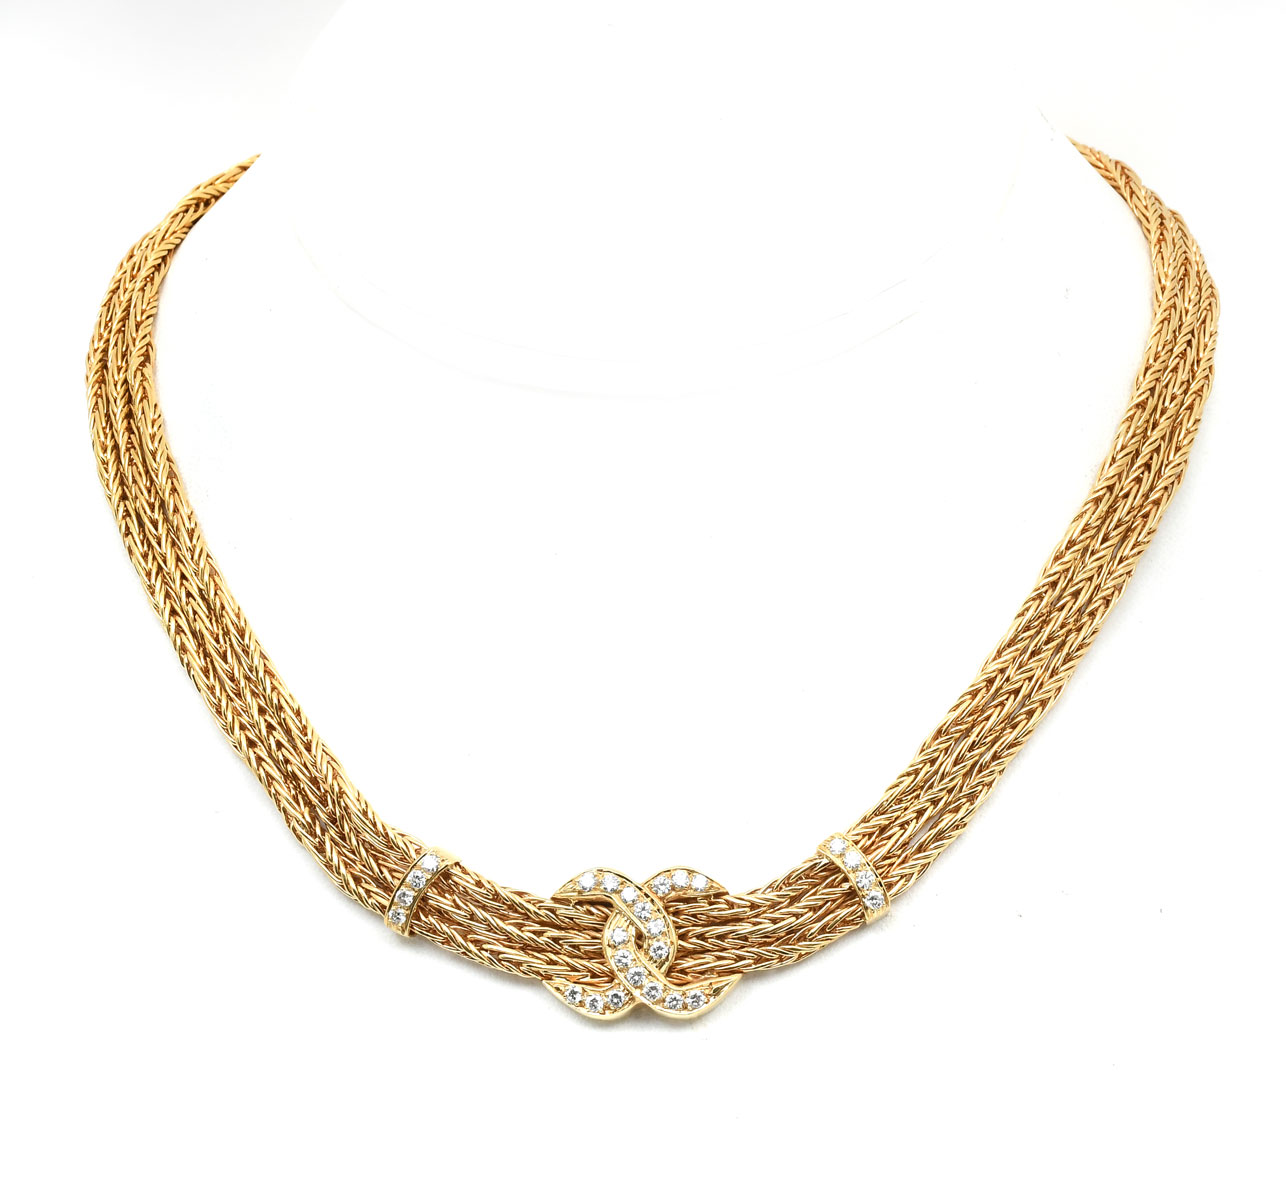 18K MULTI STRAND TWISTED ROPE NECKLACE 274c5b